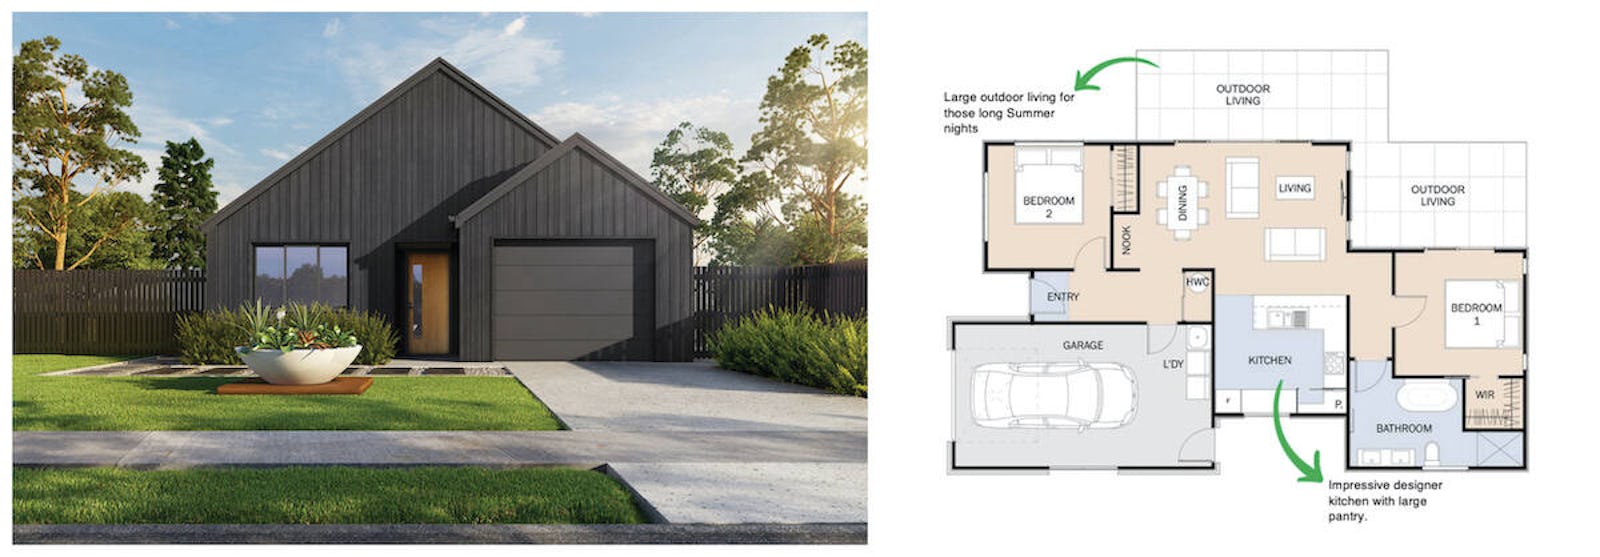 The two bedroom Sumner build plan has been designed with the Kiwi lifestyle in mind. 